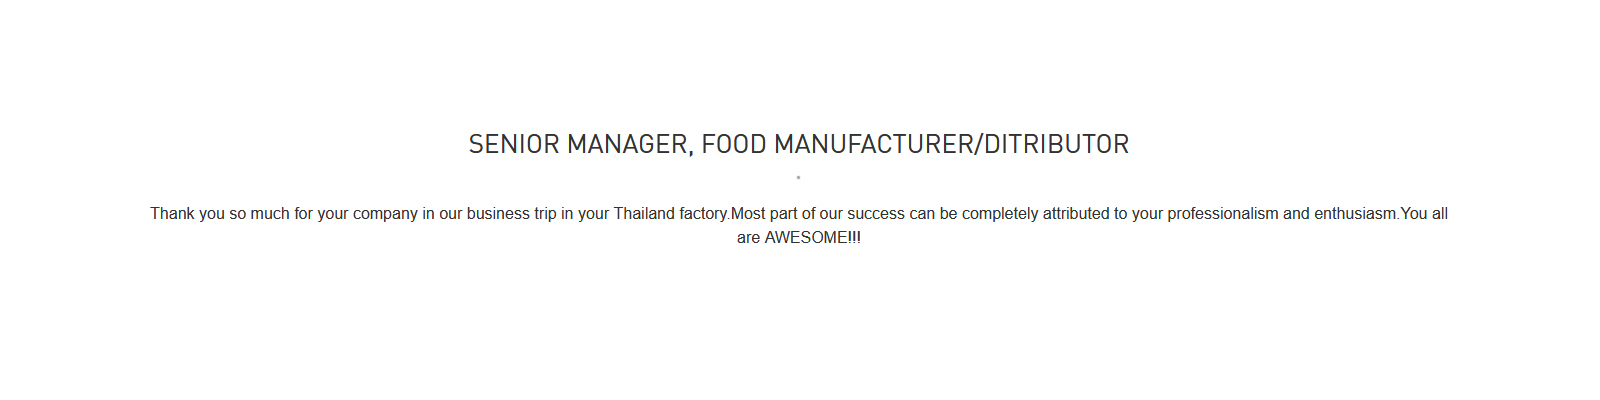 msg from manufacturers